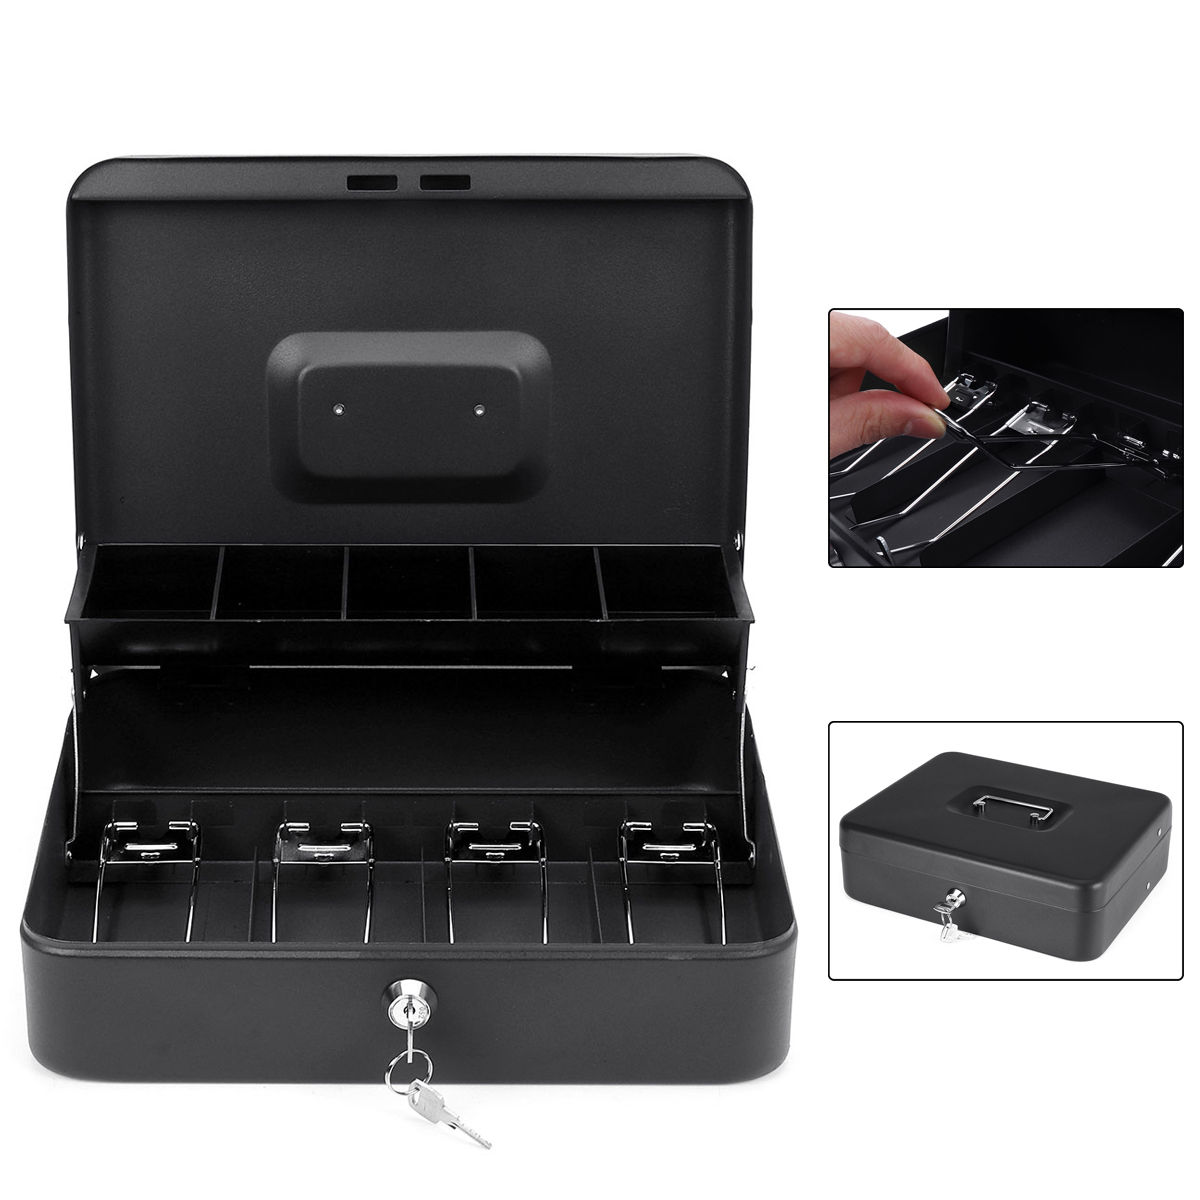 4-Bill-5-Coin-Cash-Drawer-Tray-Storage-Box-for-Cashier-Money-Security-Lock-Safe-Box-1457105-9